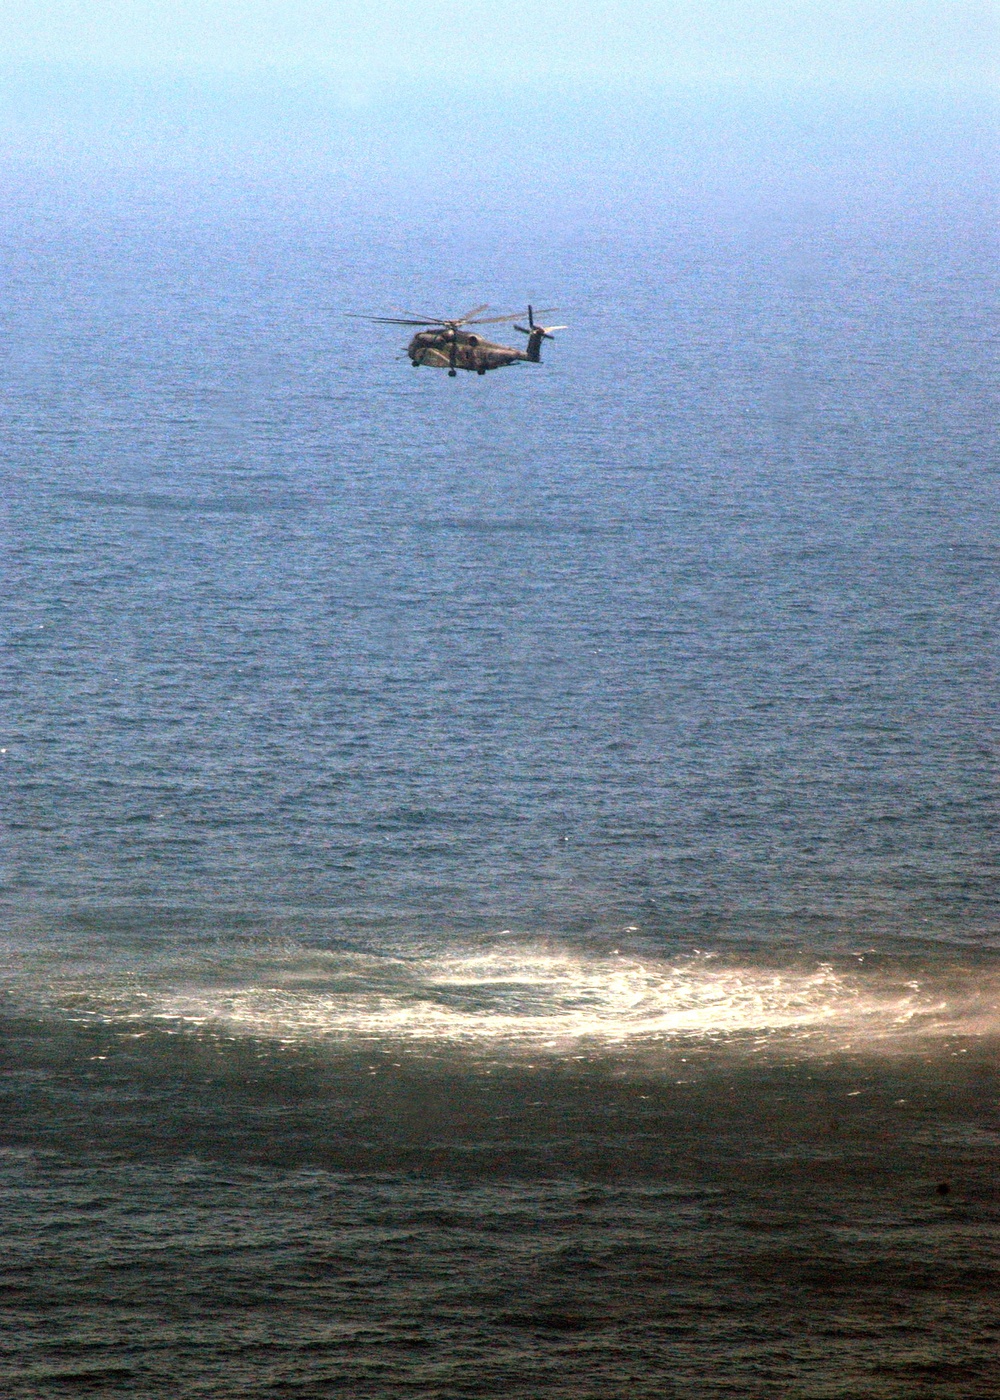 An HM-53 Sea Dragon  conducts Search and Rescue operations